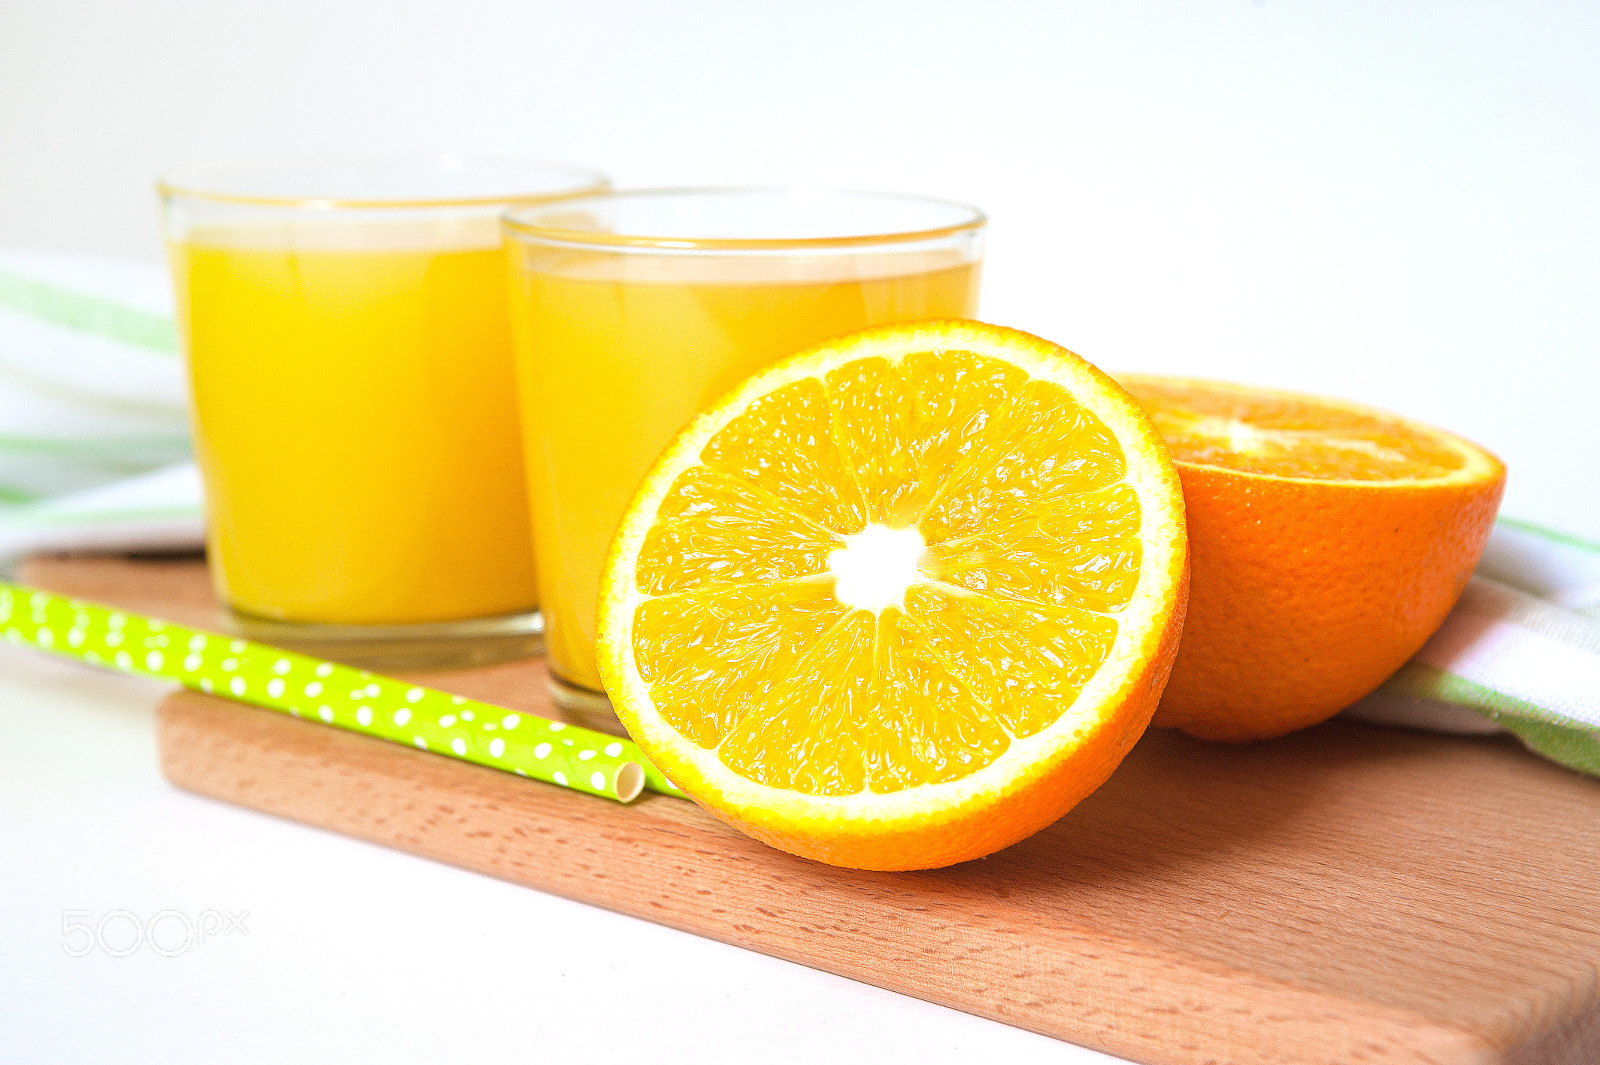 Nikon D700 sample photo. Orange juice on wooden table with sliced fruits photography